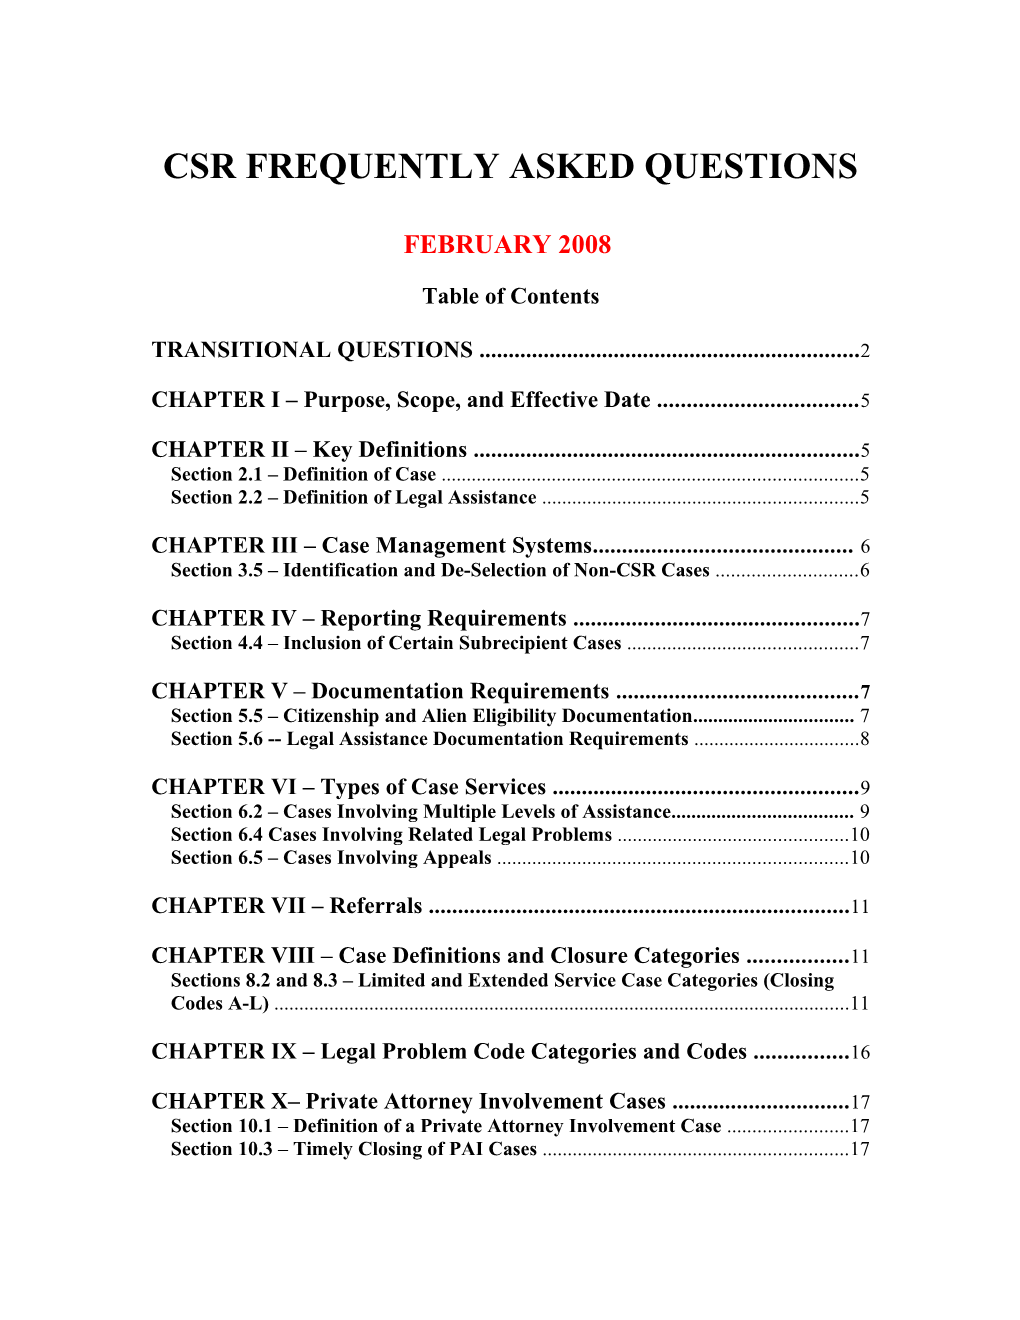 Compendium of Csr Answers As of 10-30-07